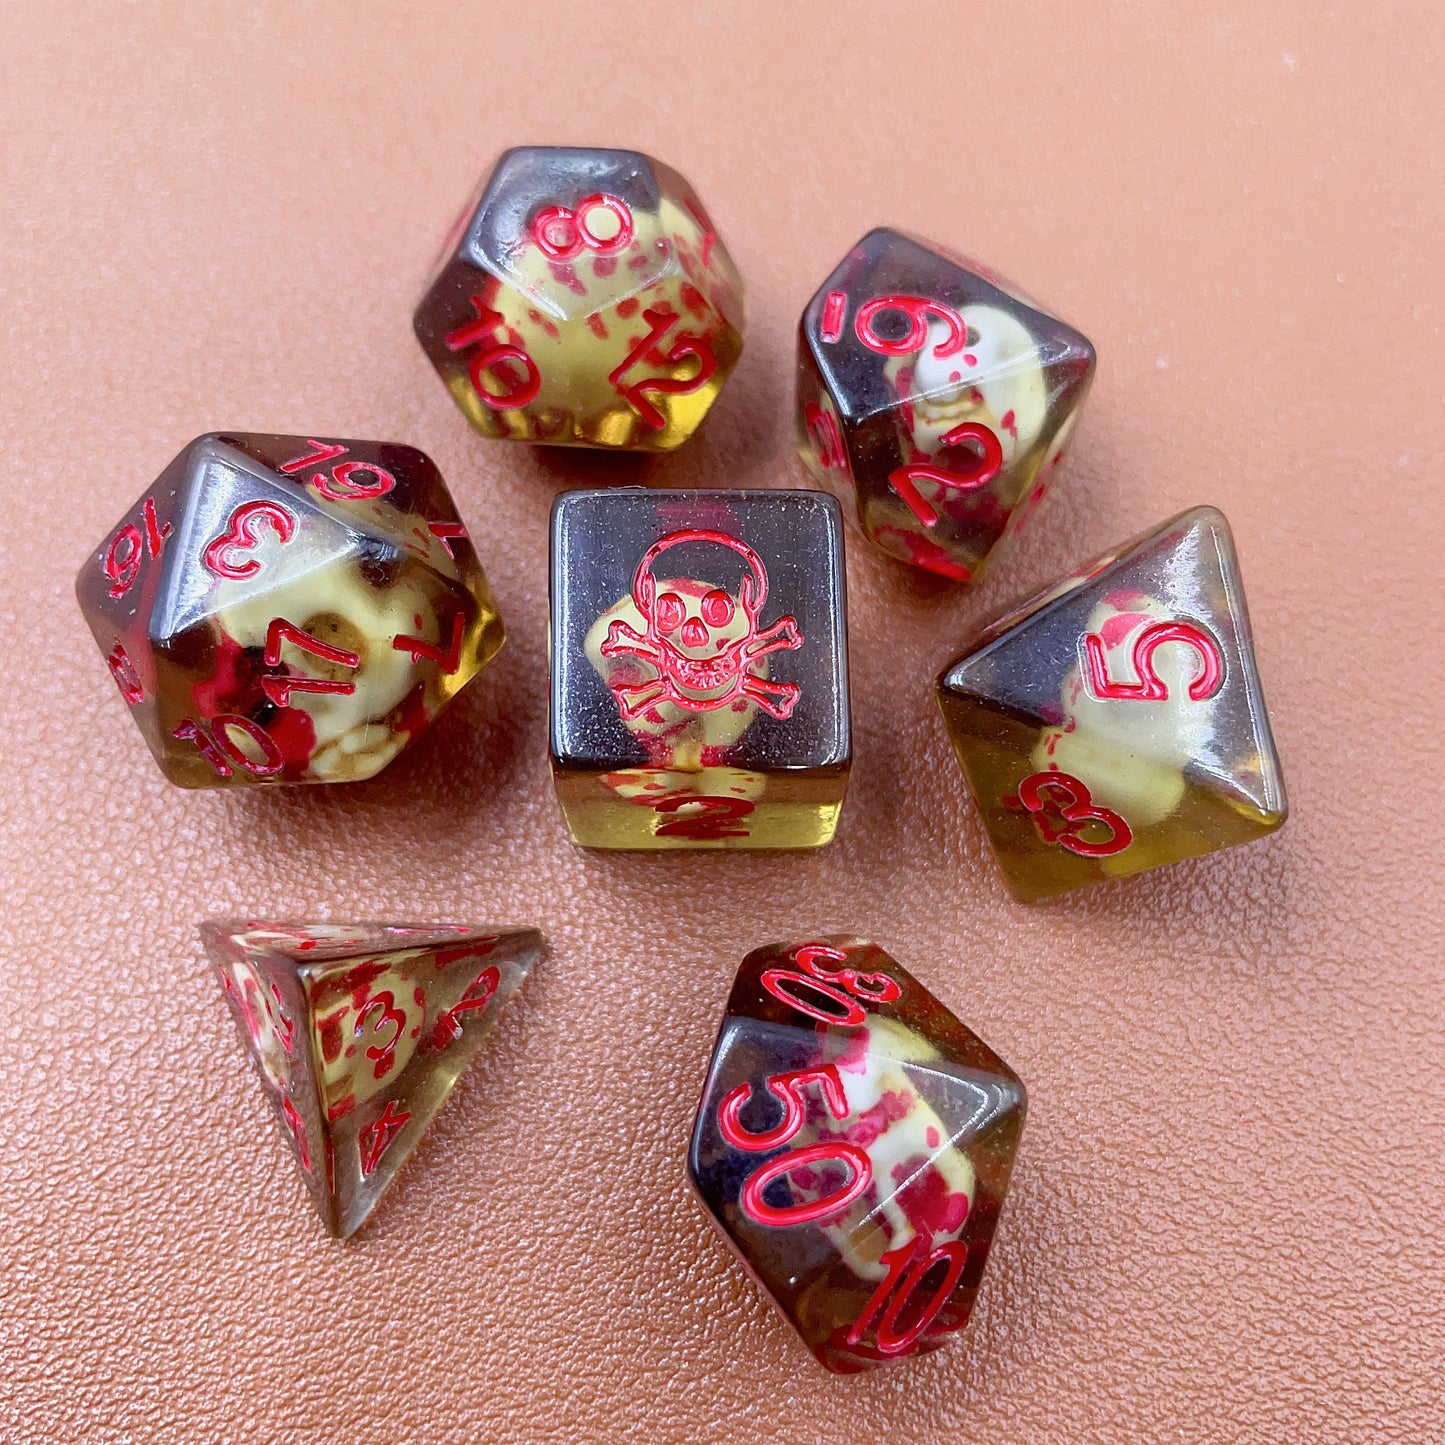 FREE Today: Blood Rage Skull Dice Set (Give away a random dice)